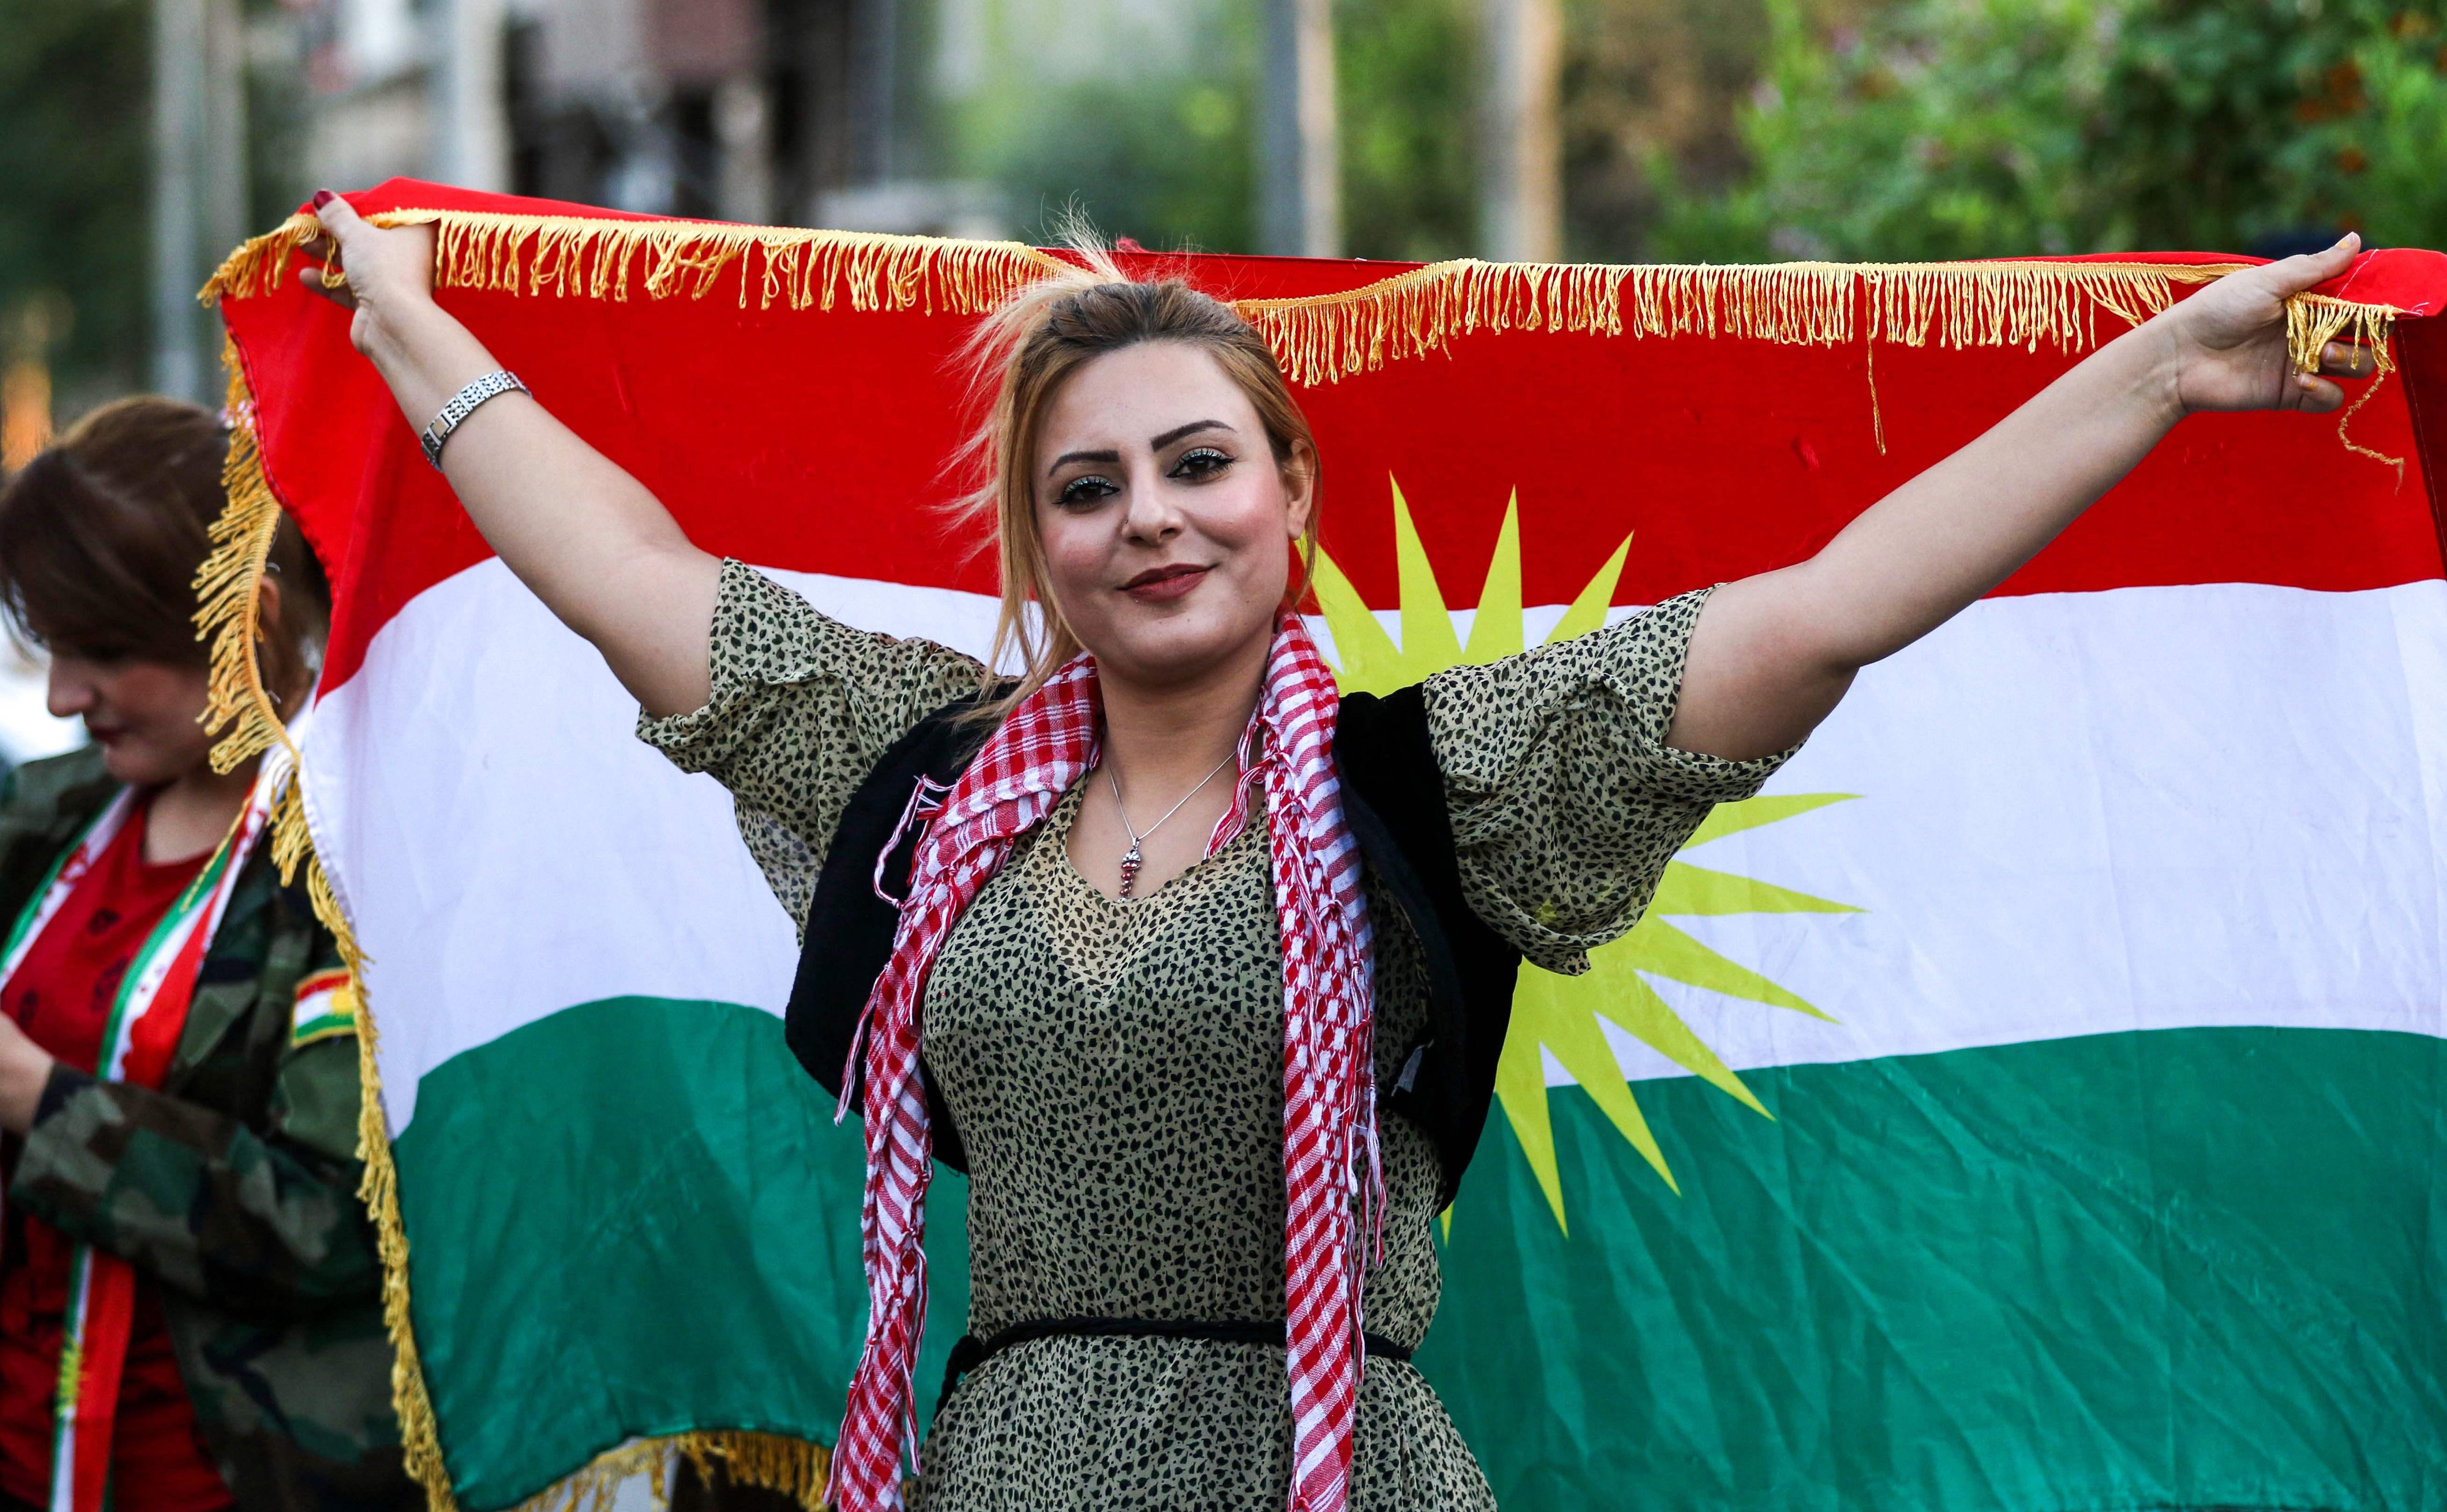 An Iraqi Kurdish woman poses with the flag of Iraqi Kurdistan during a demonstration outside the UN Office in Arbil, the capital of the autonomous region, on October 21, 2017, protesting against the escalating crisis with Baghdad. / AFP PHOTO / SAFIN HAMED